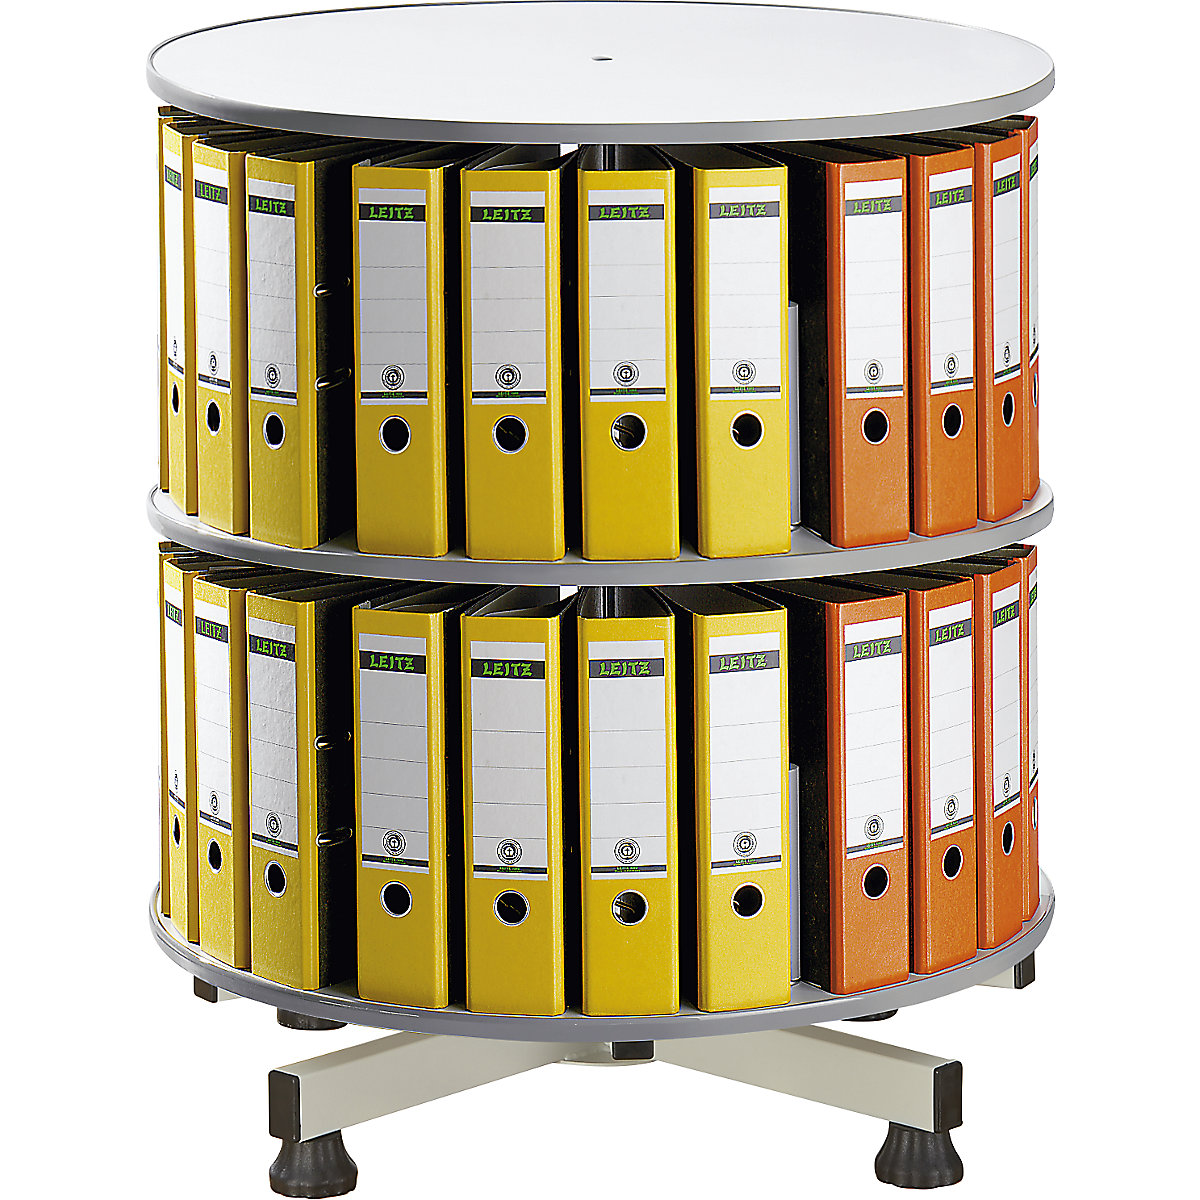 Rotary filing system